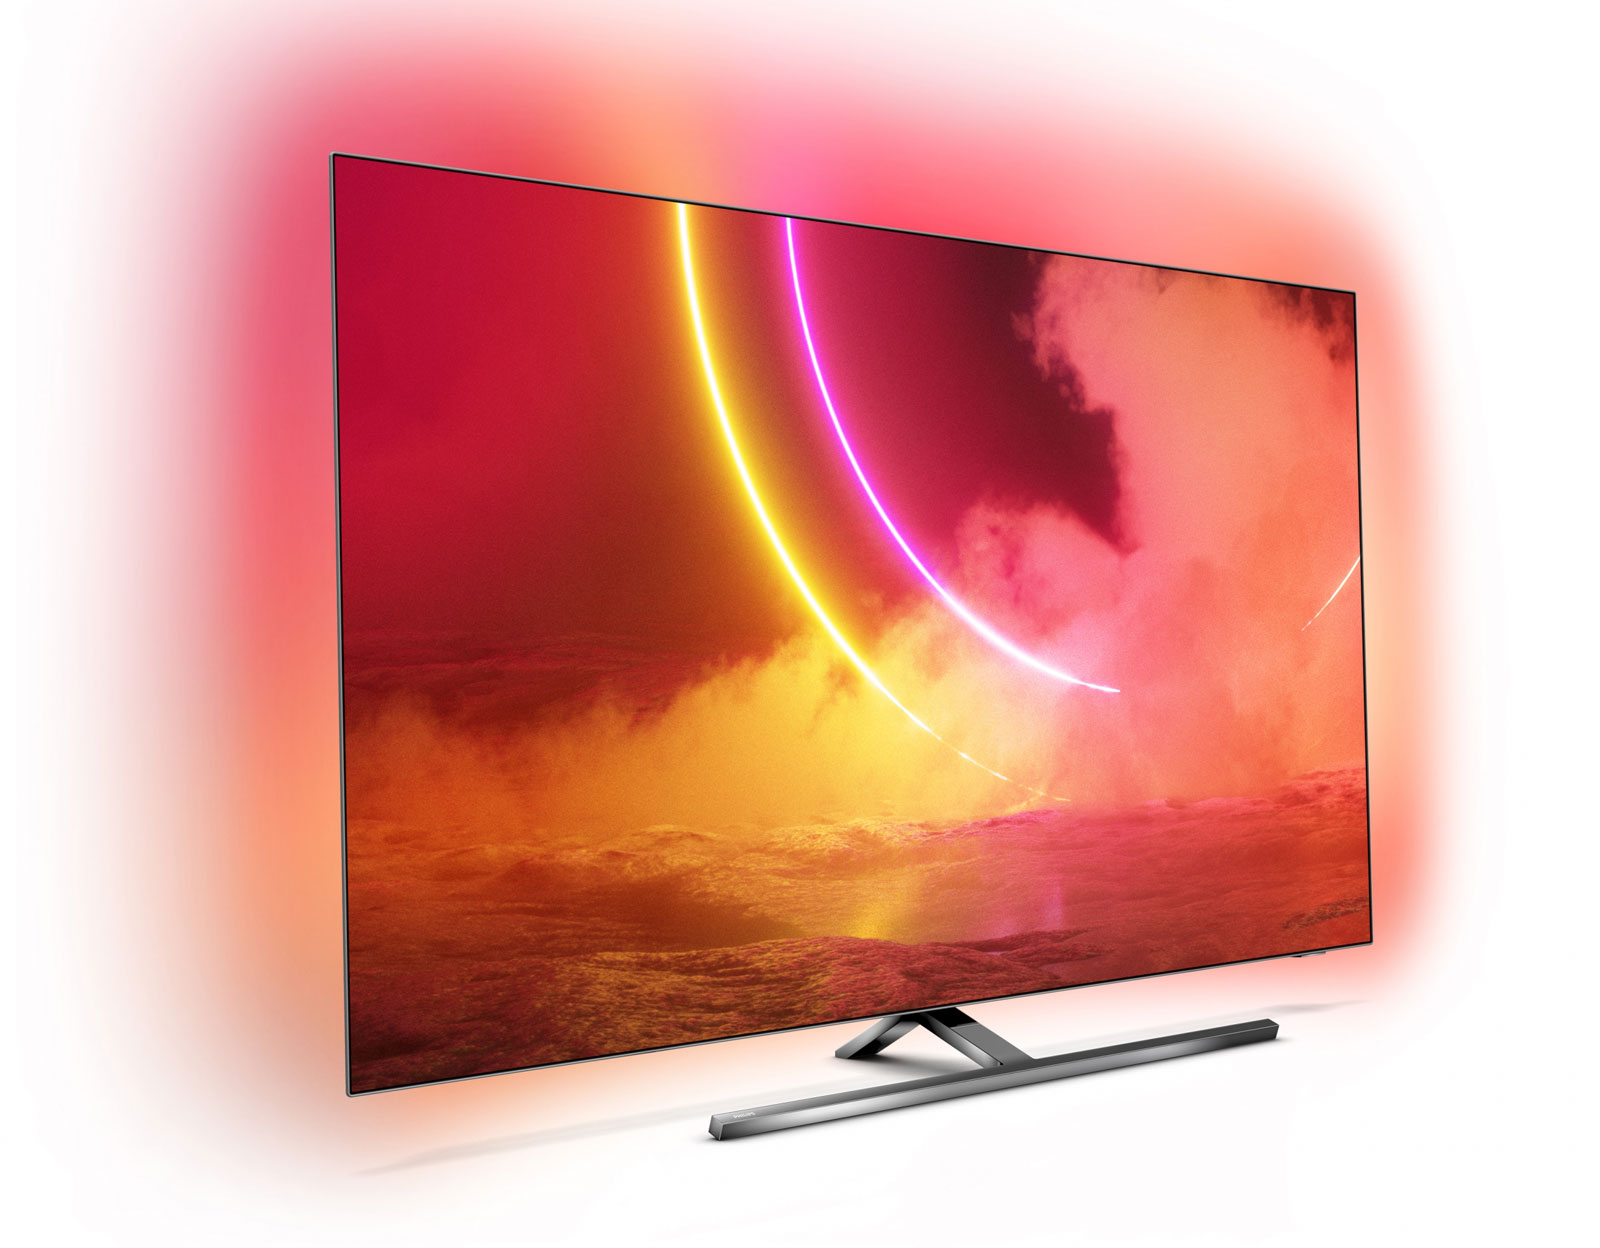 anders salaris het ergste Review: Philips OLED856 (65OLED856) | OLED TV With X-factor